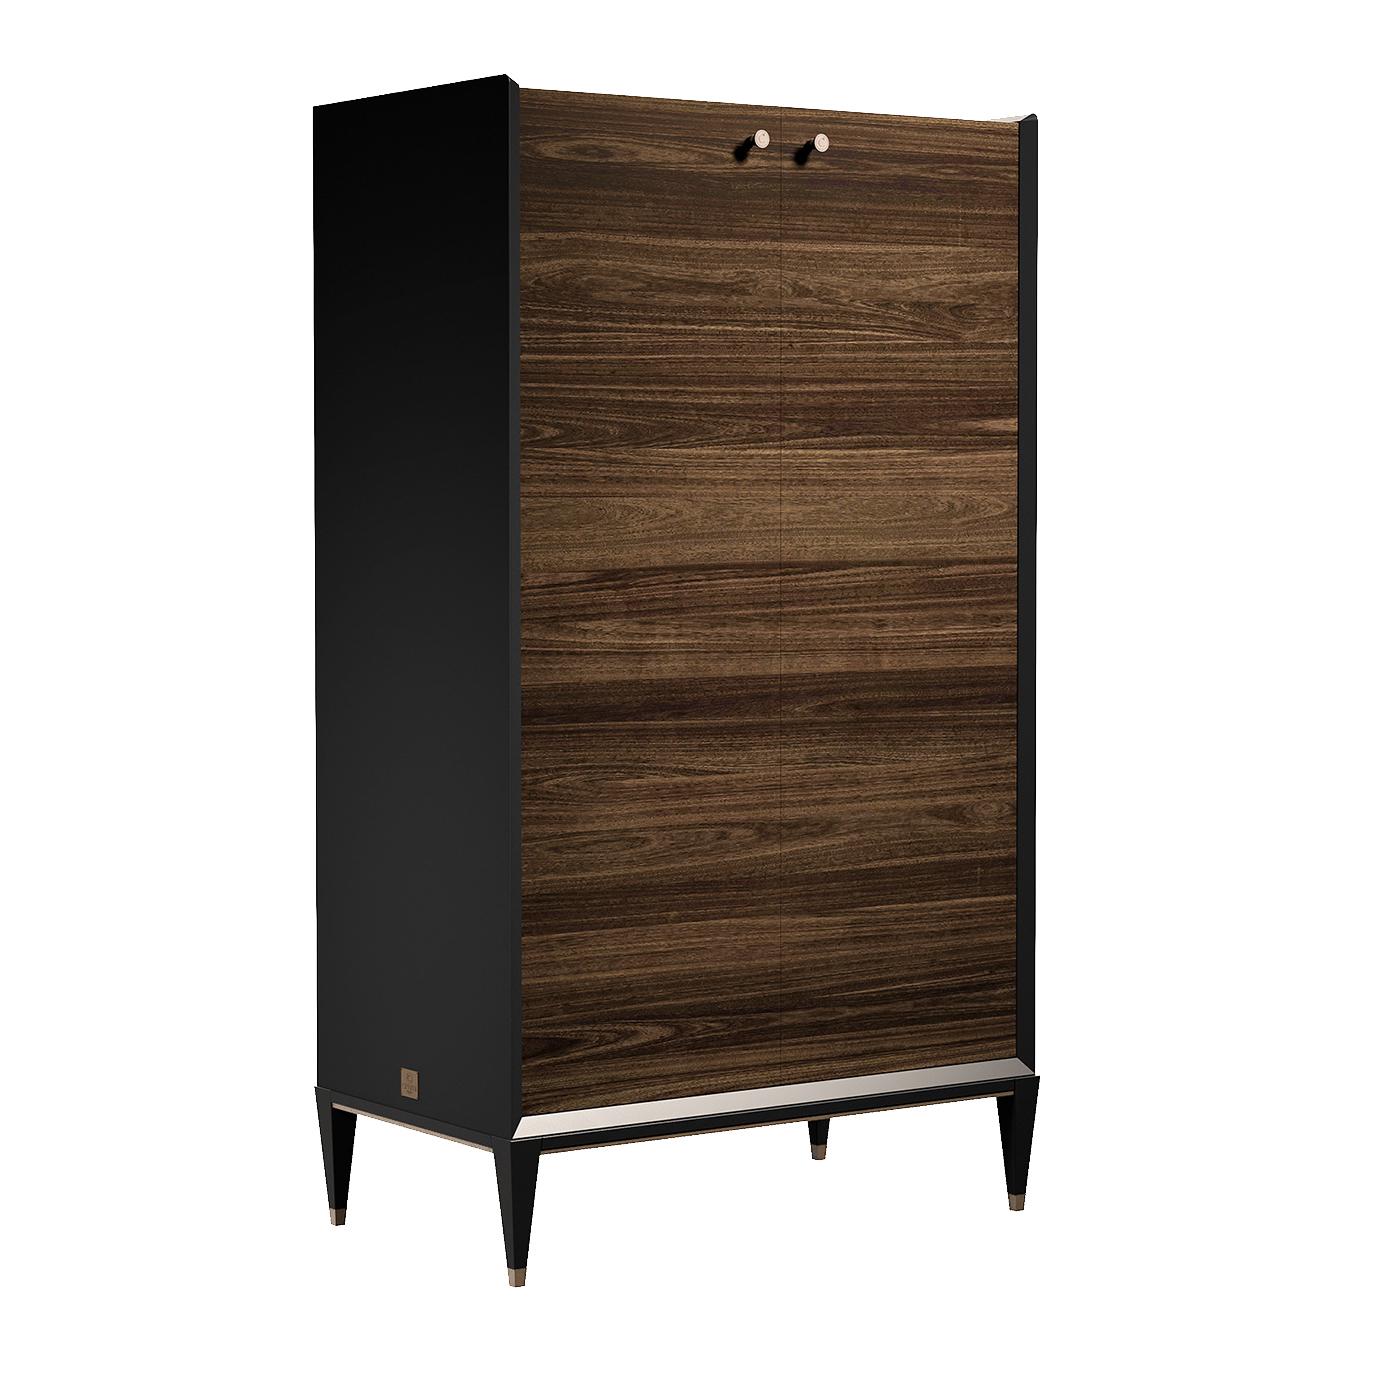 This remarkable cabinet blends light and dark woods in a modern design to bring style and functionality to any decor. The design showcases a tall rectangular unit with veneered door encased in a clean-cut wooden frame with black, velvet-like finish.